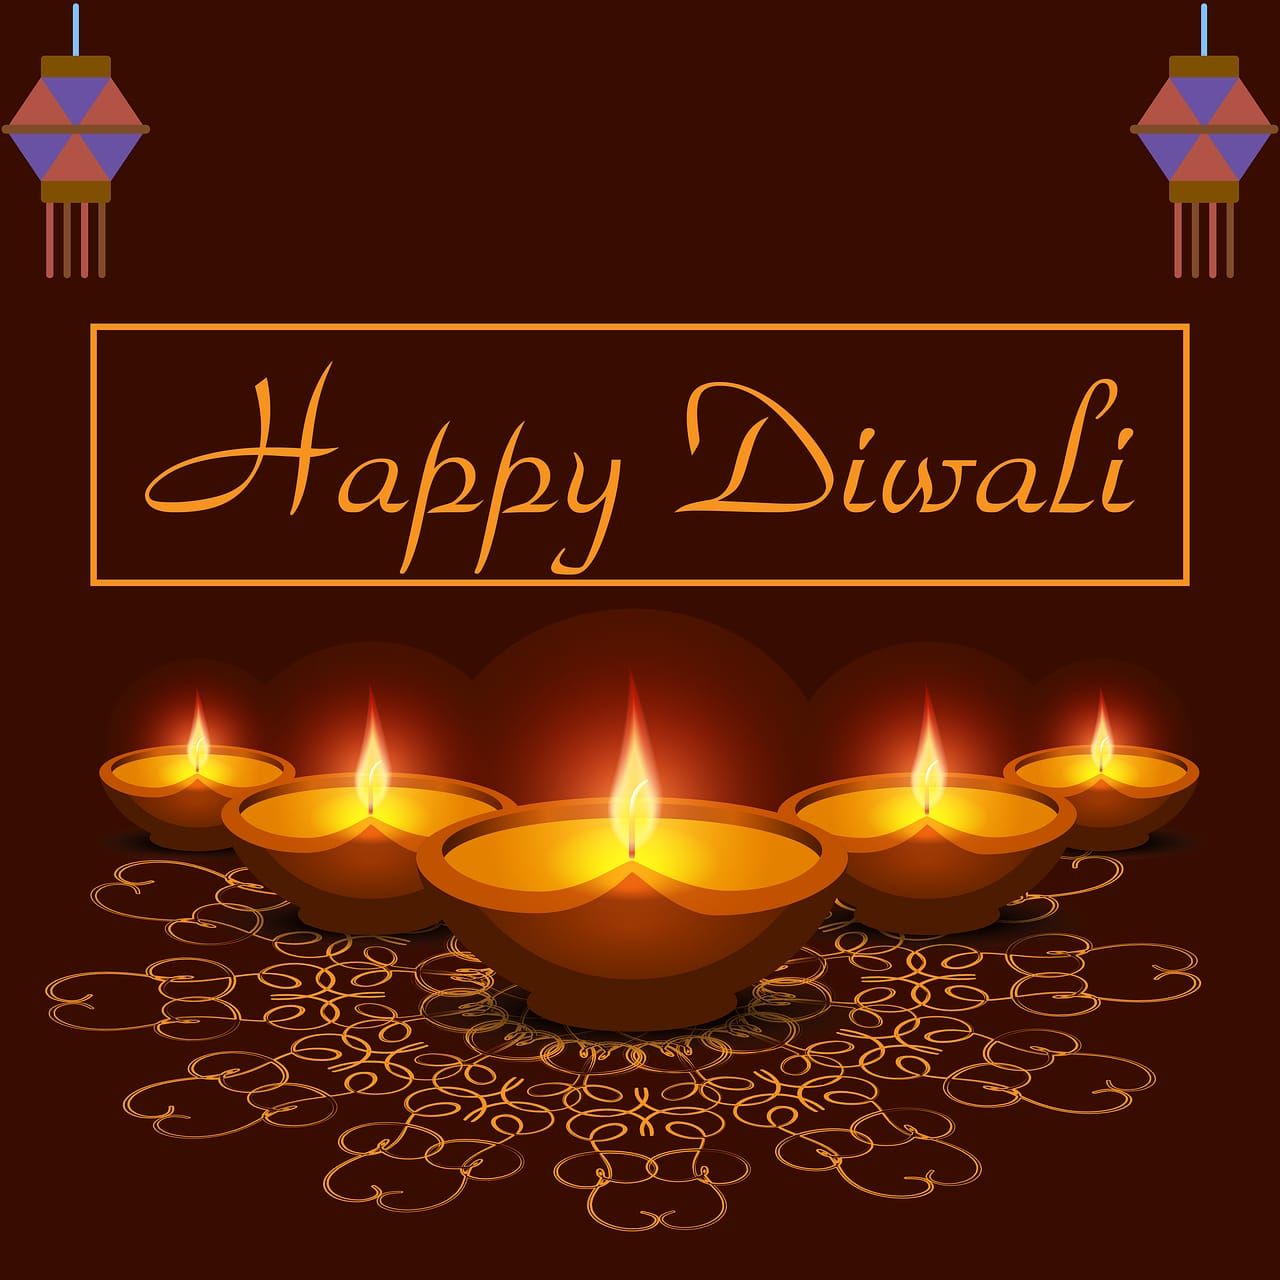 Happy Diwali 2020: Send heartwarming wishes with picture to your loved ones on Diwali